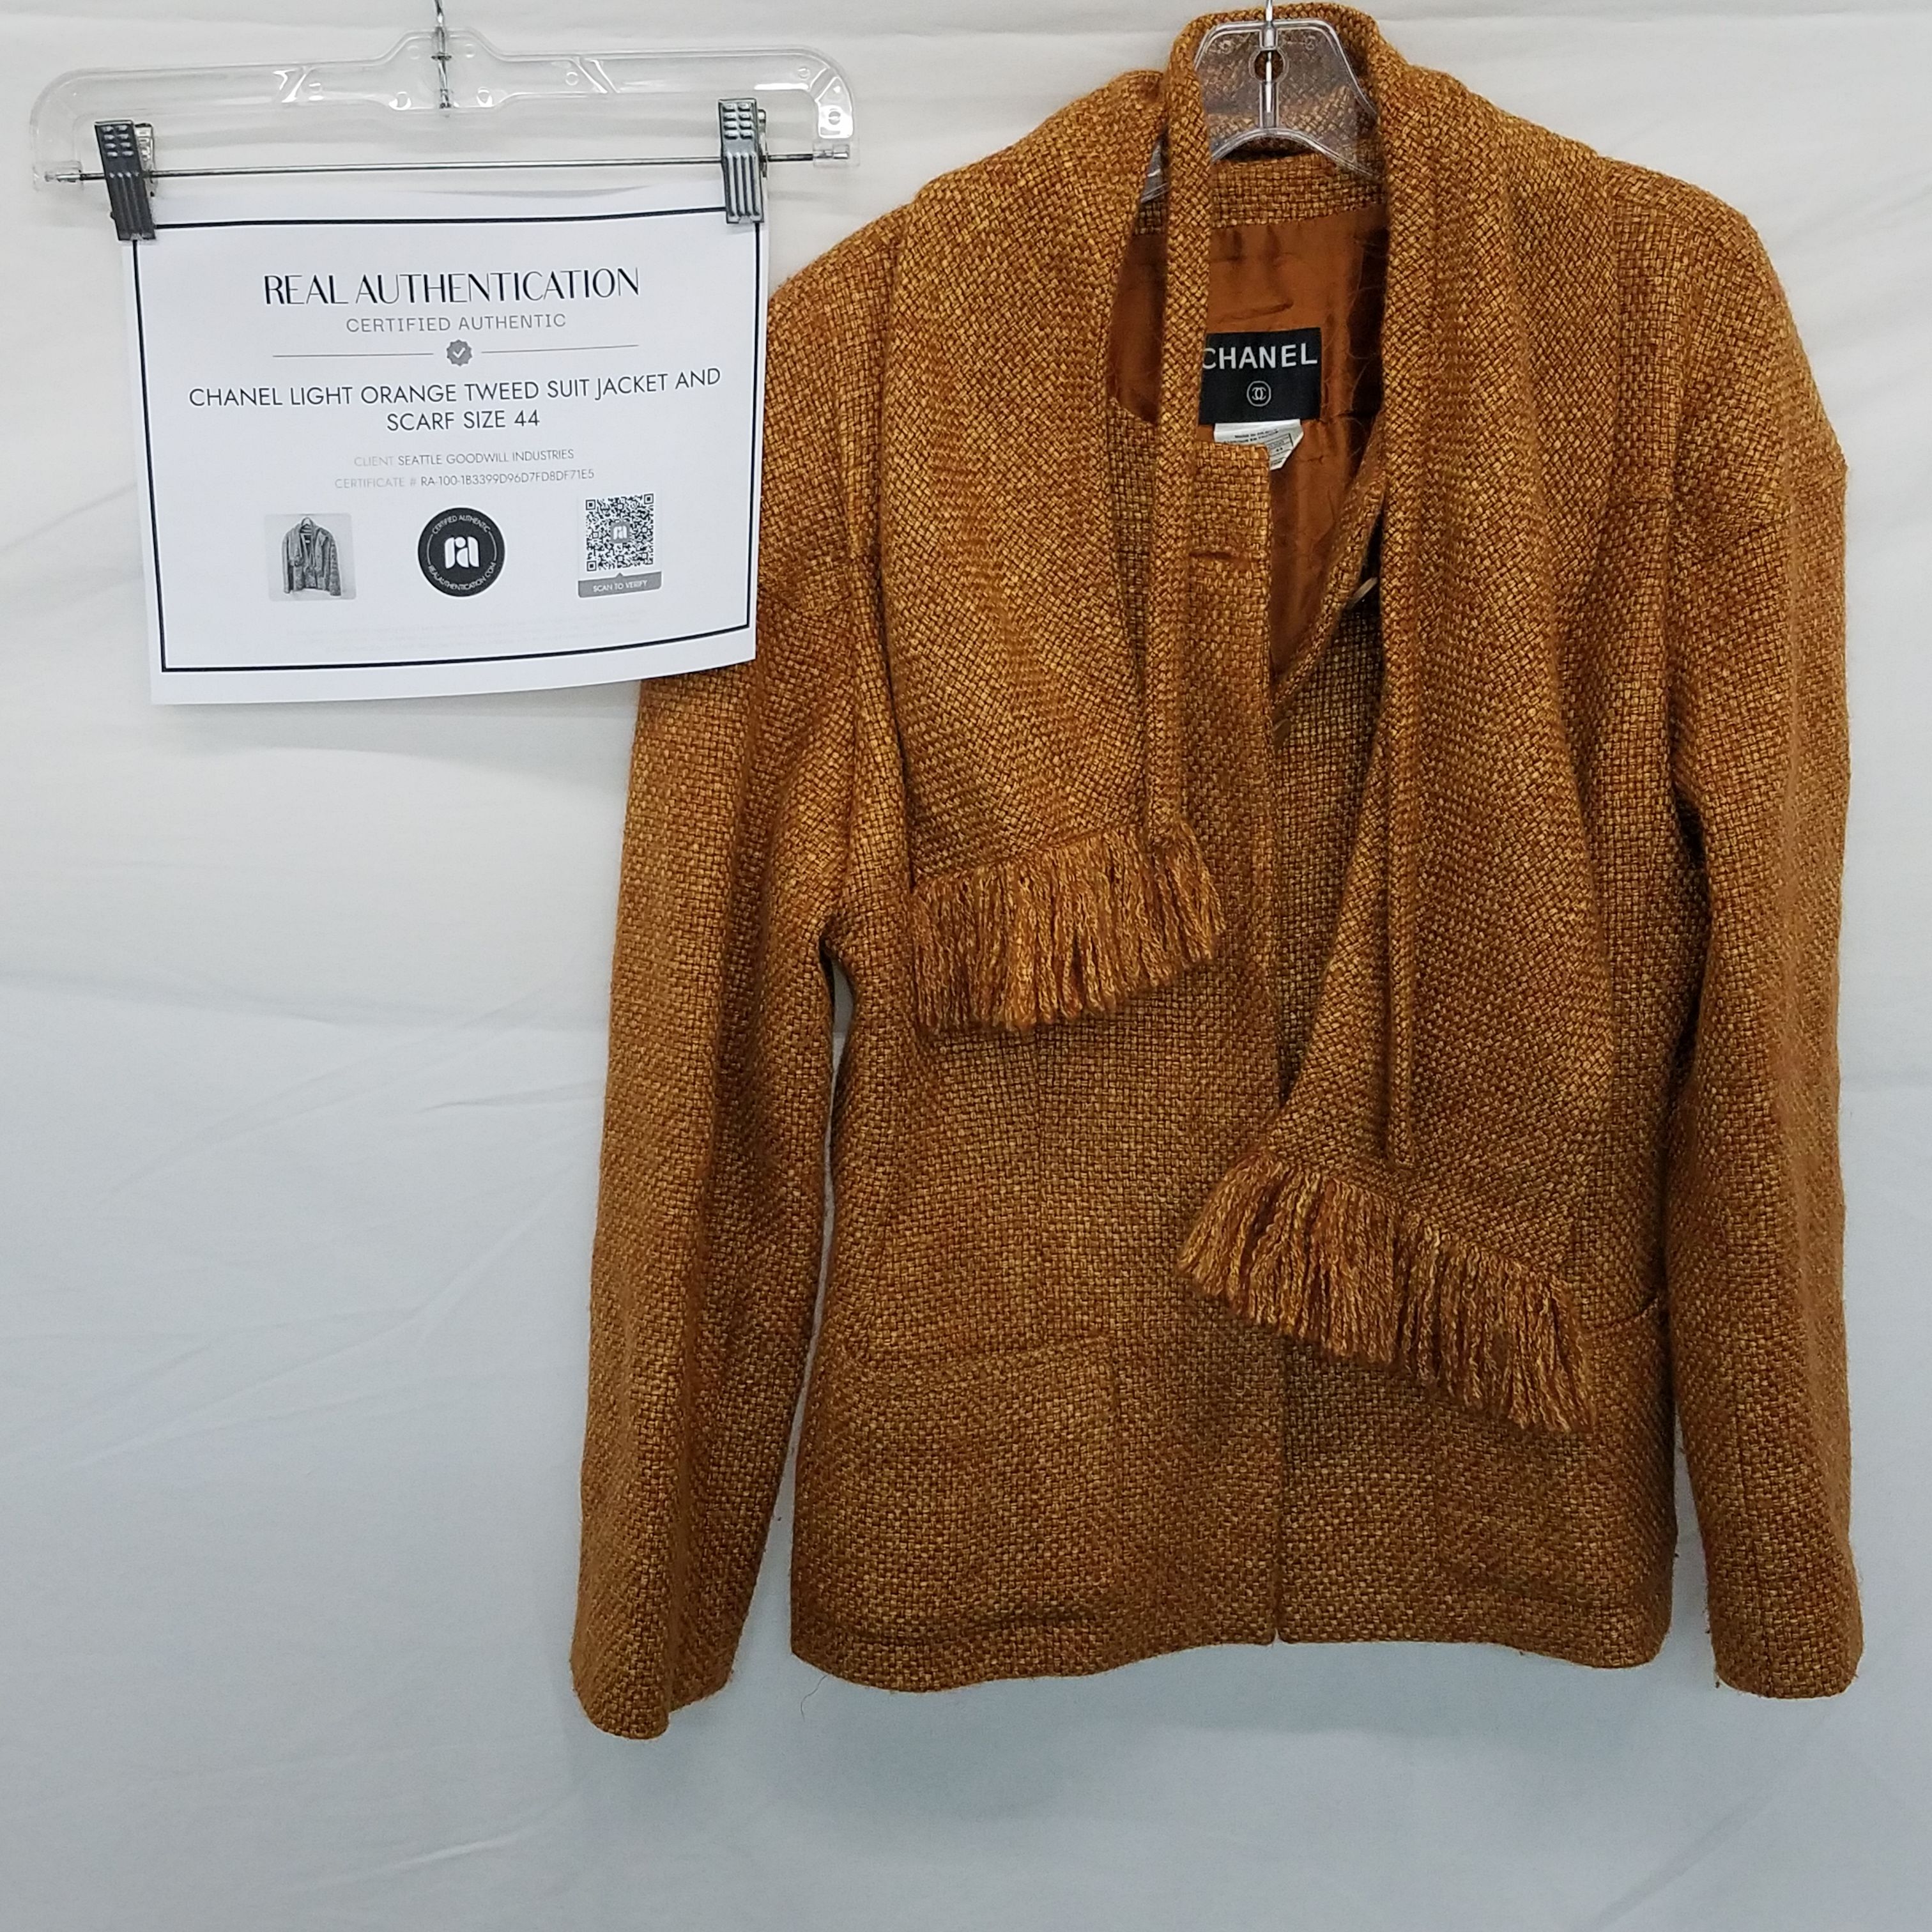 Buy the AUTHENTICATED Chanel Light Orange Tweed Suit Jacket and Scarf Size  44